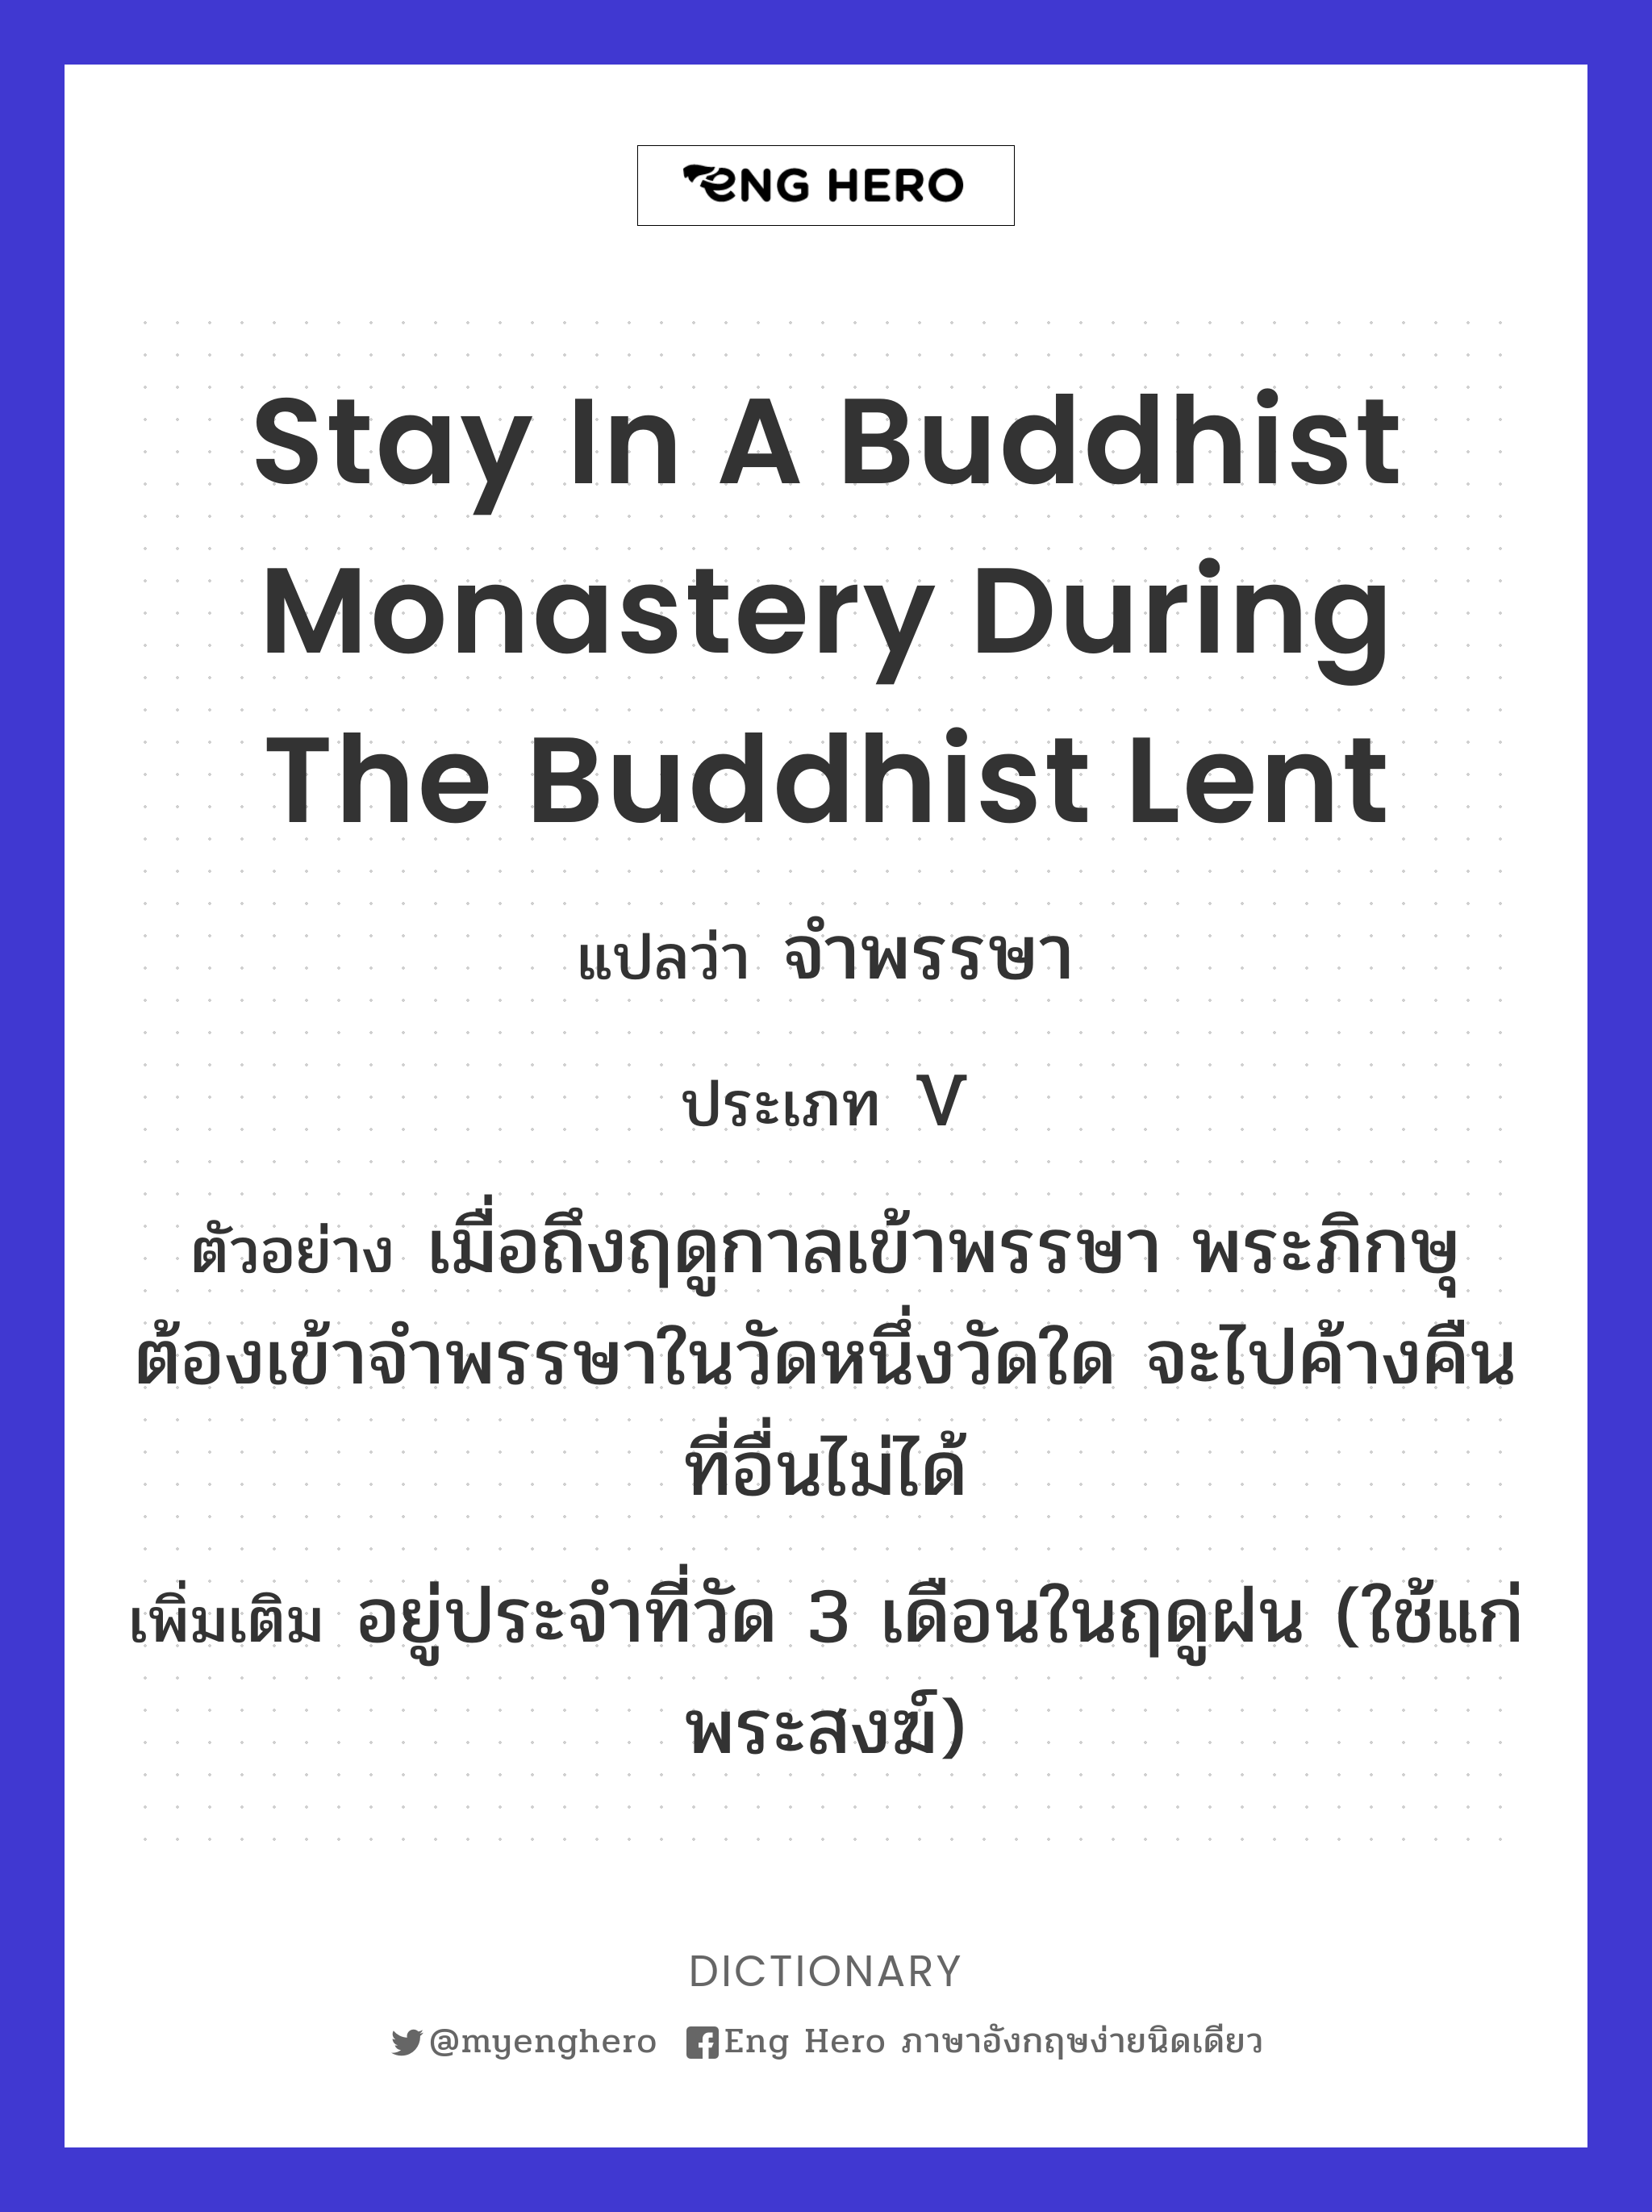 stay in a Buddhist monastery during the Buddhist Lent